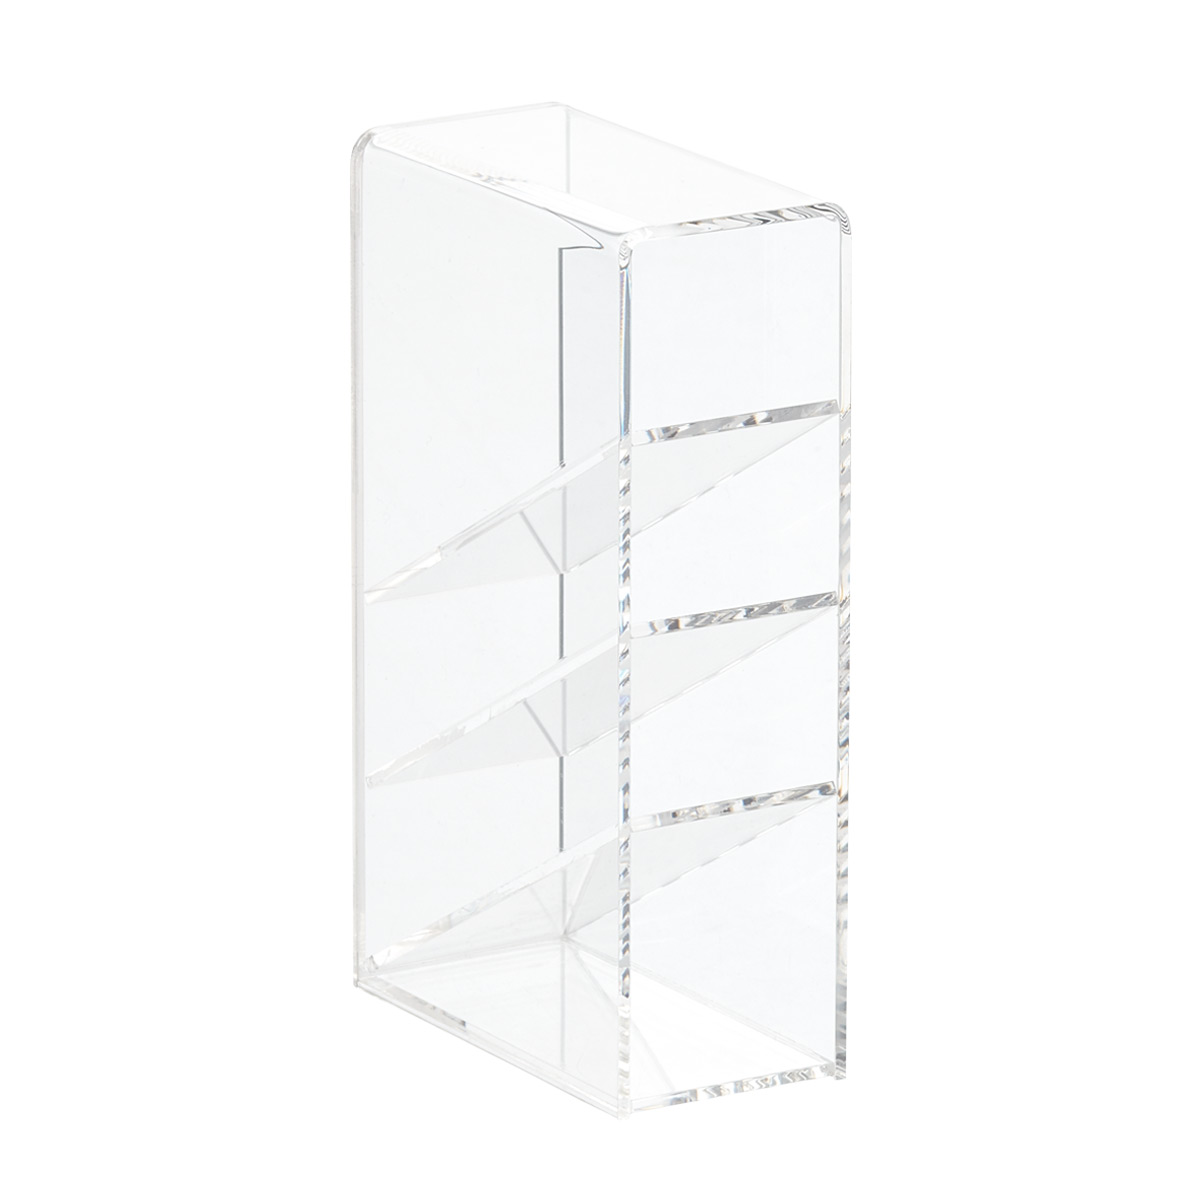 https://www.containerstore.com/catalogimages/340464/10073915-slanted-pen-organizer-acryl.jpg